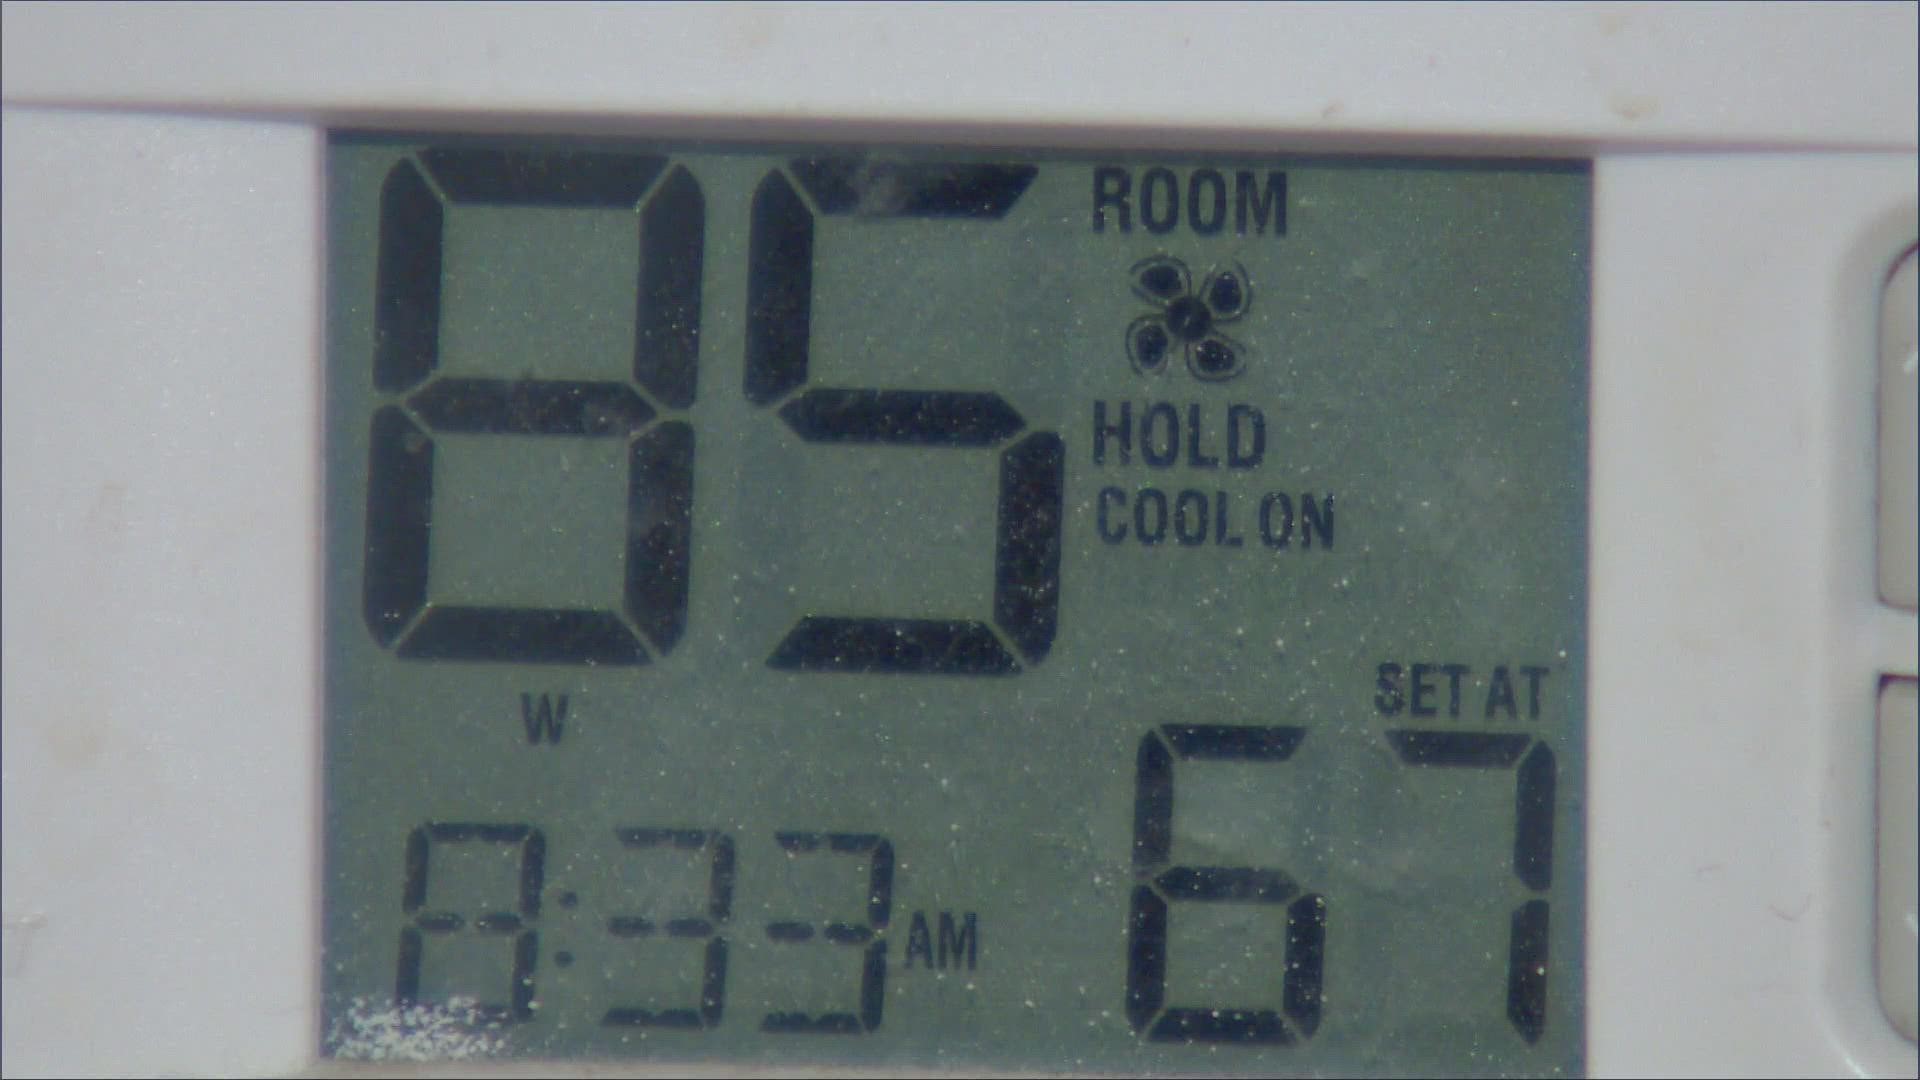 One resident's A/C went out Wednesday. By the time someone came to fix it -- more than 24 hours later -- it was 99 degrees in her apartment.